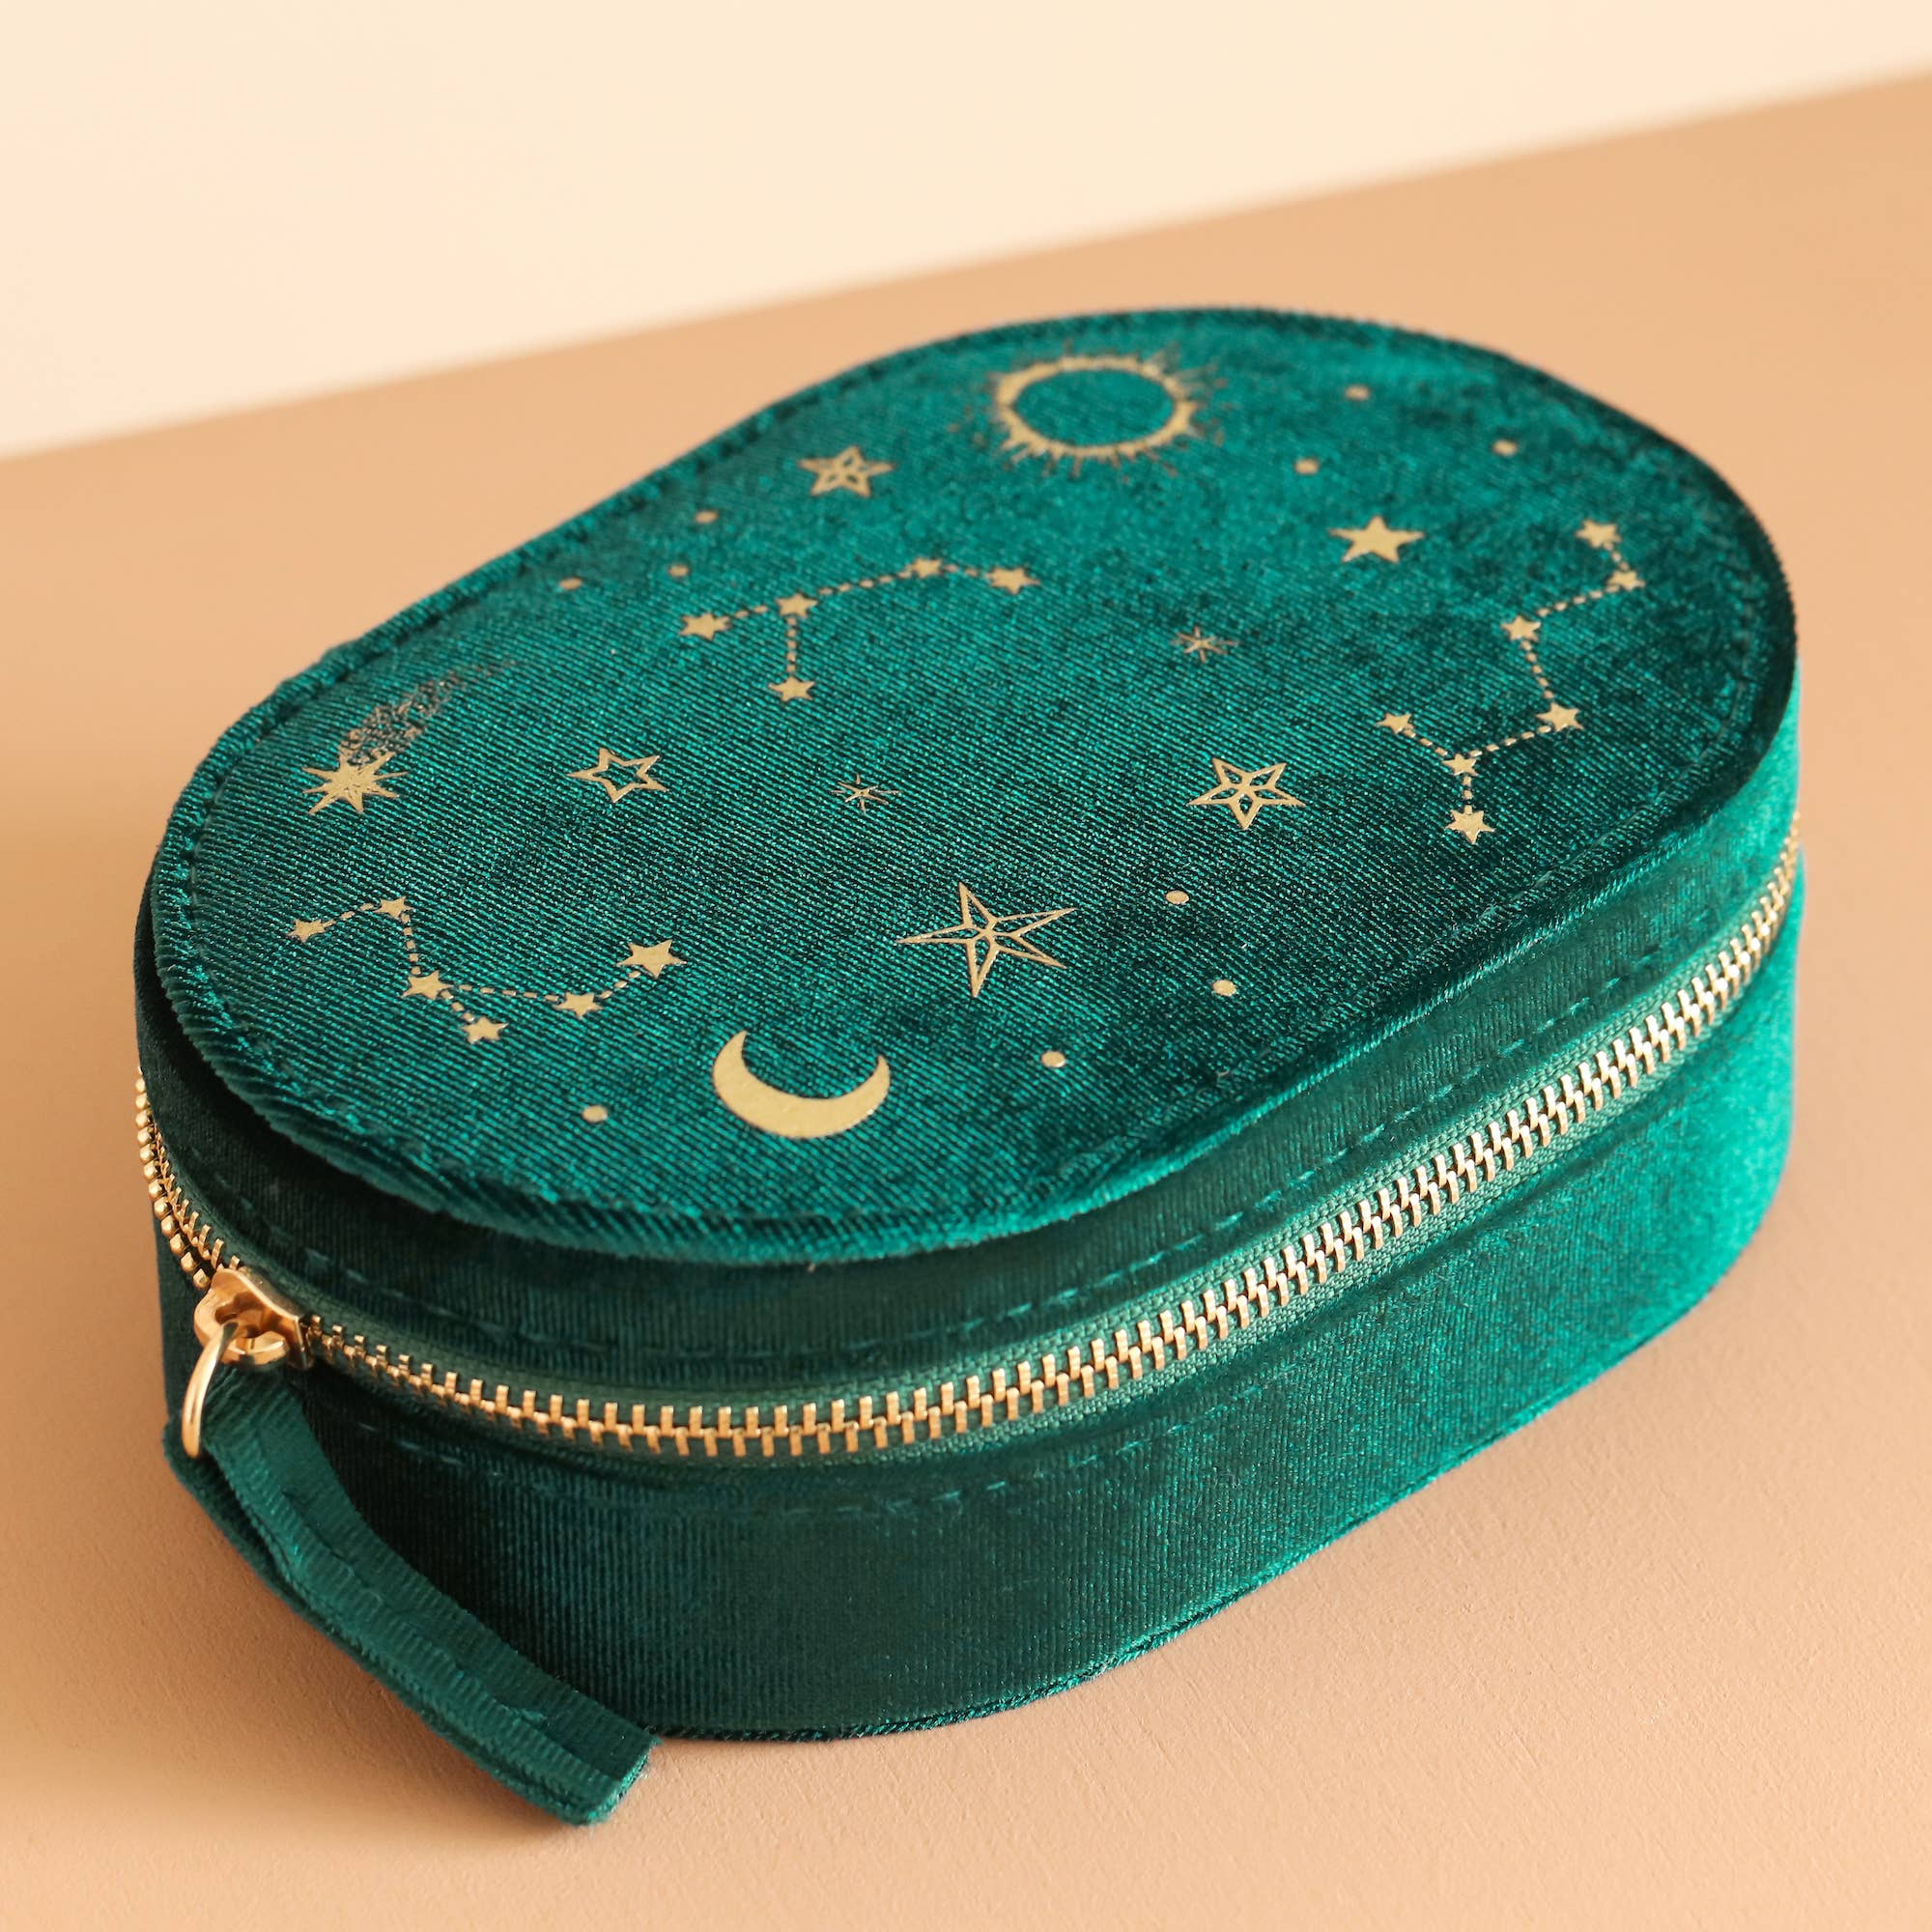 Starry Night Printed Velvet Oval Jewelry Case in Teal - P I C N I C 